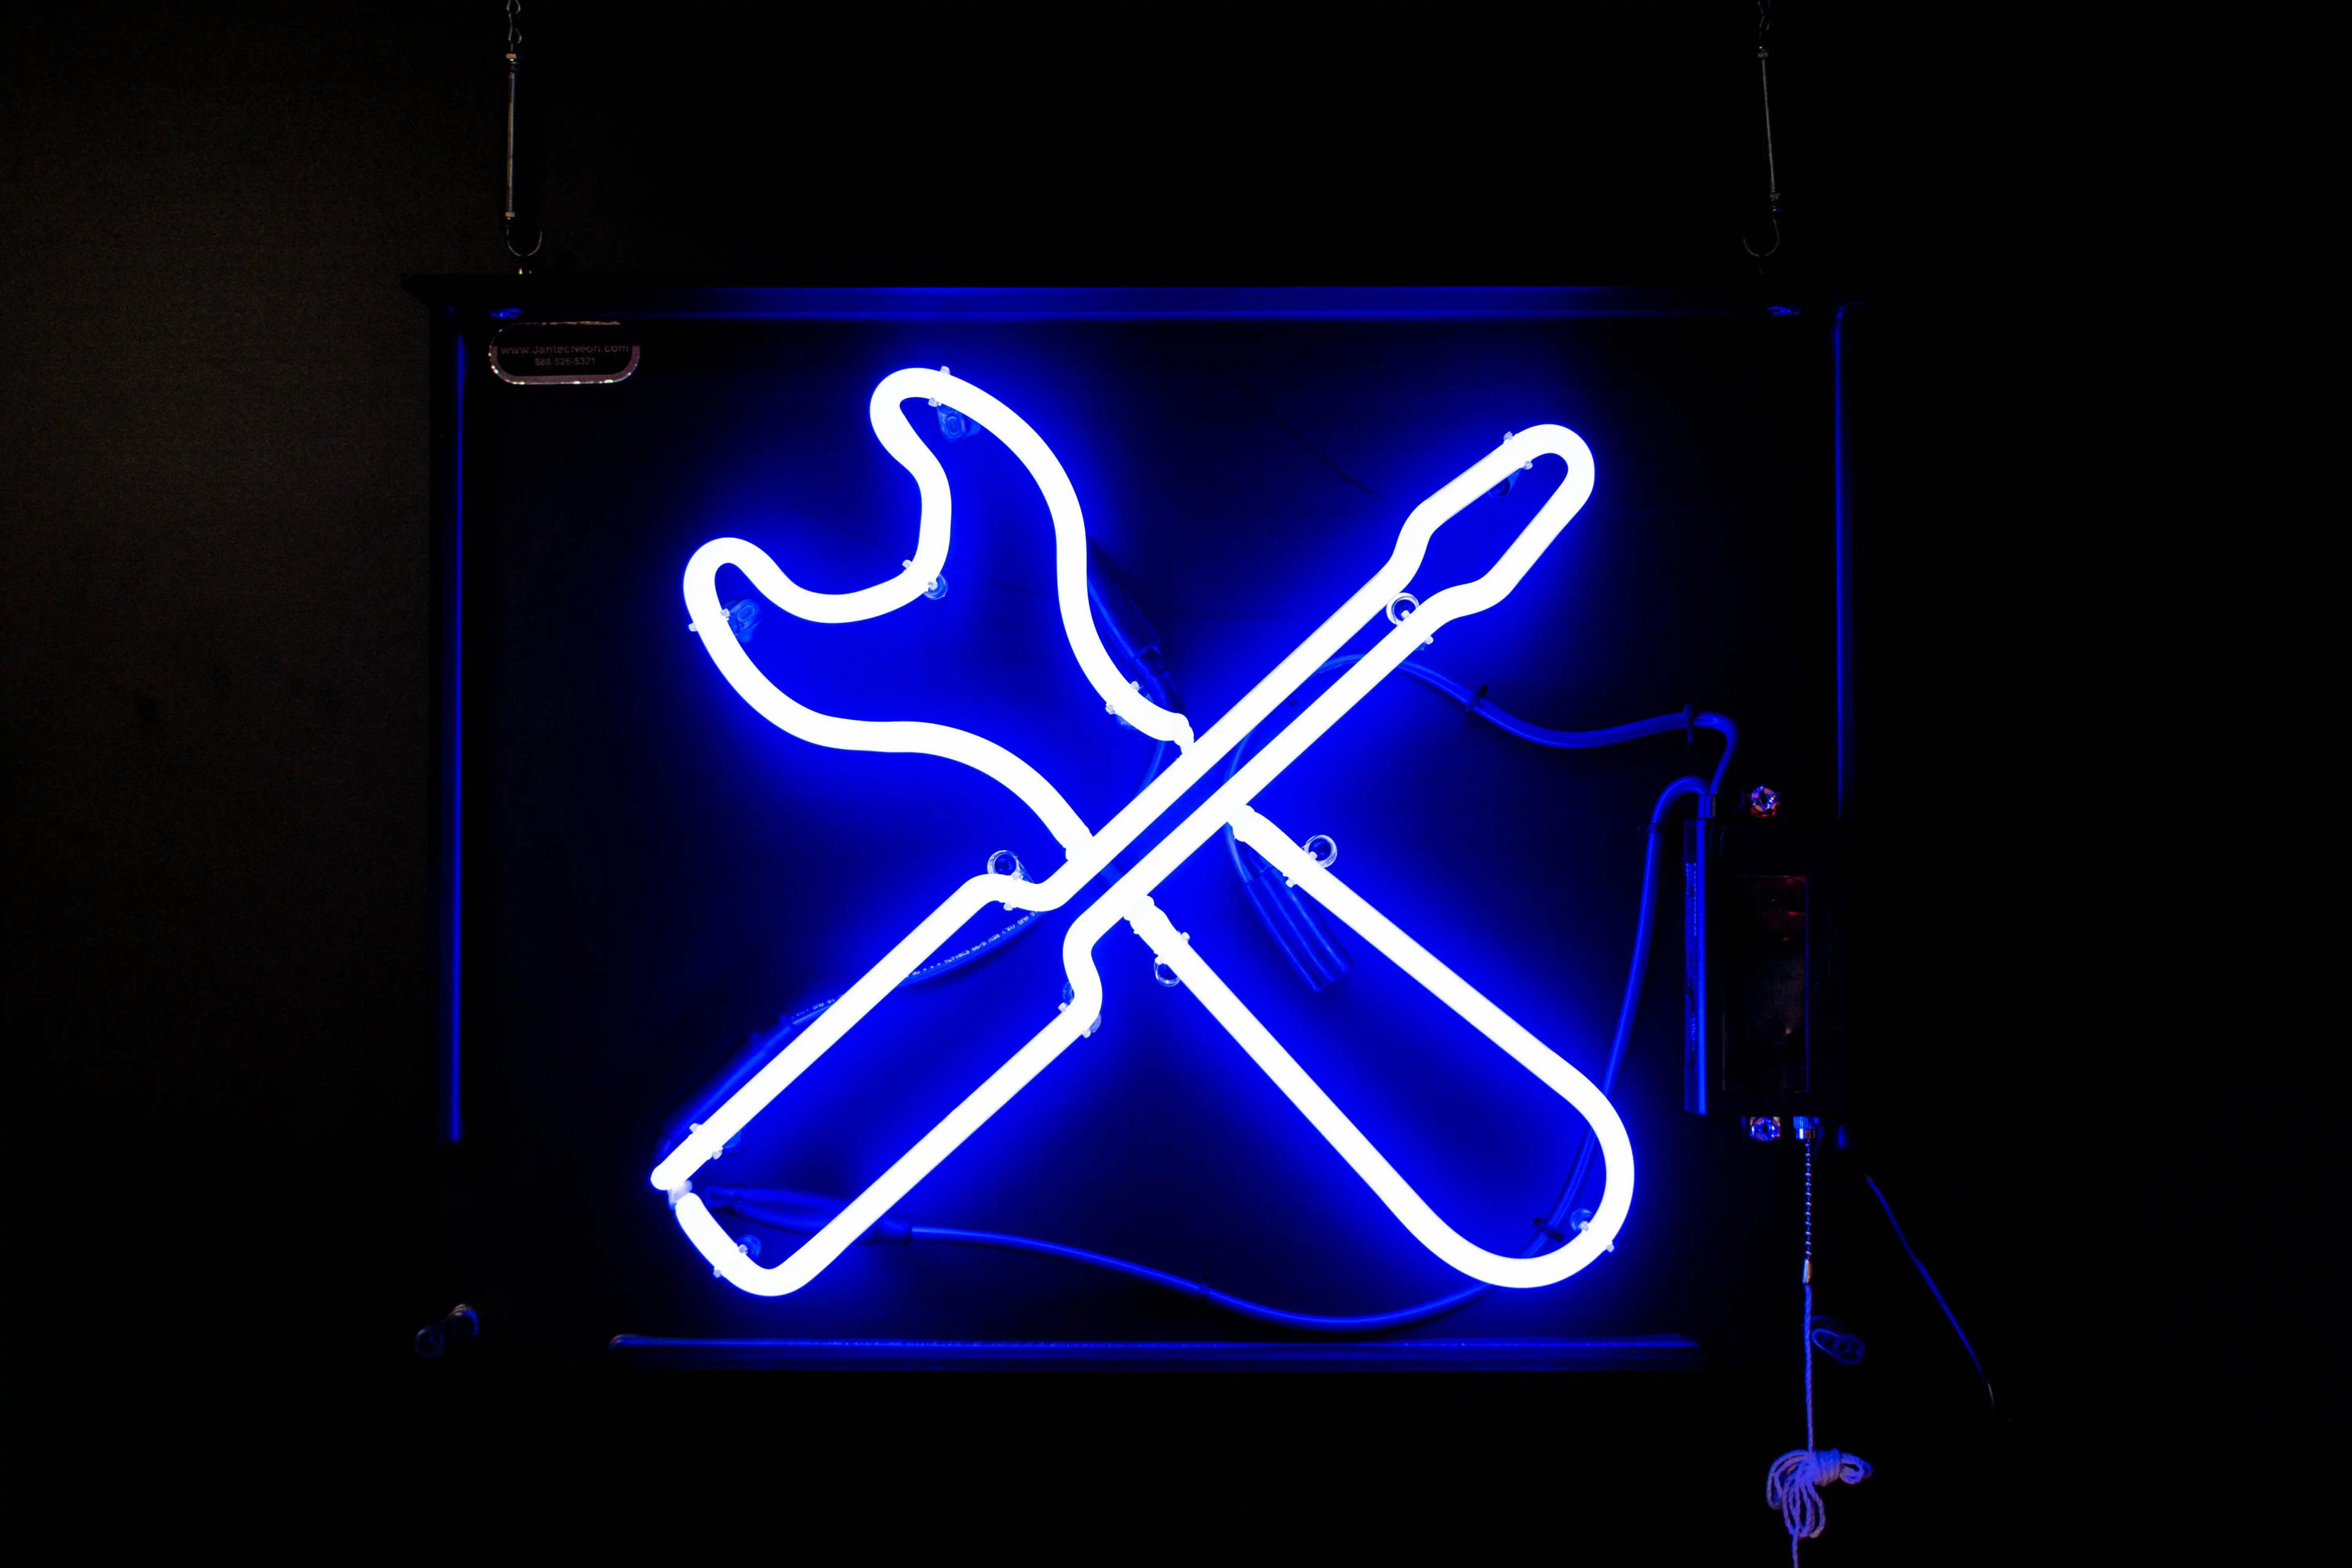 A blue neon sign of a screwdriver and wrench crossed over each other.